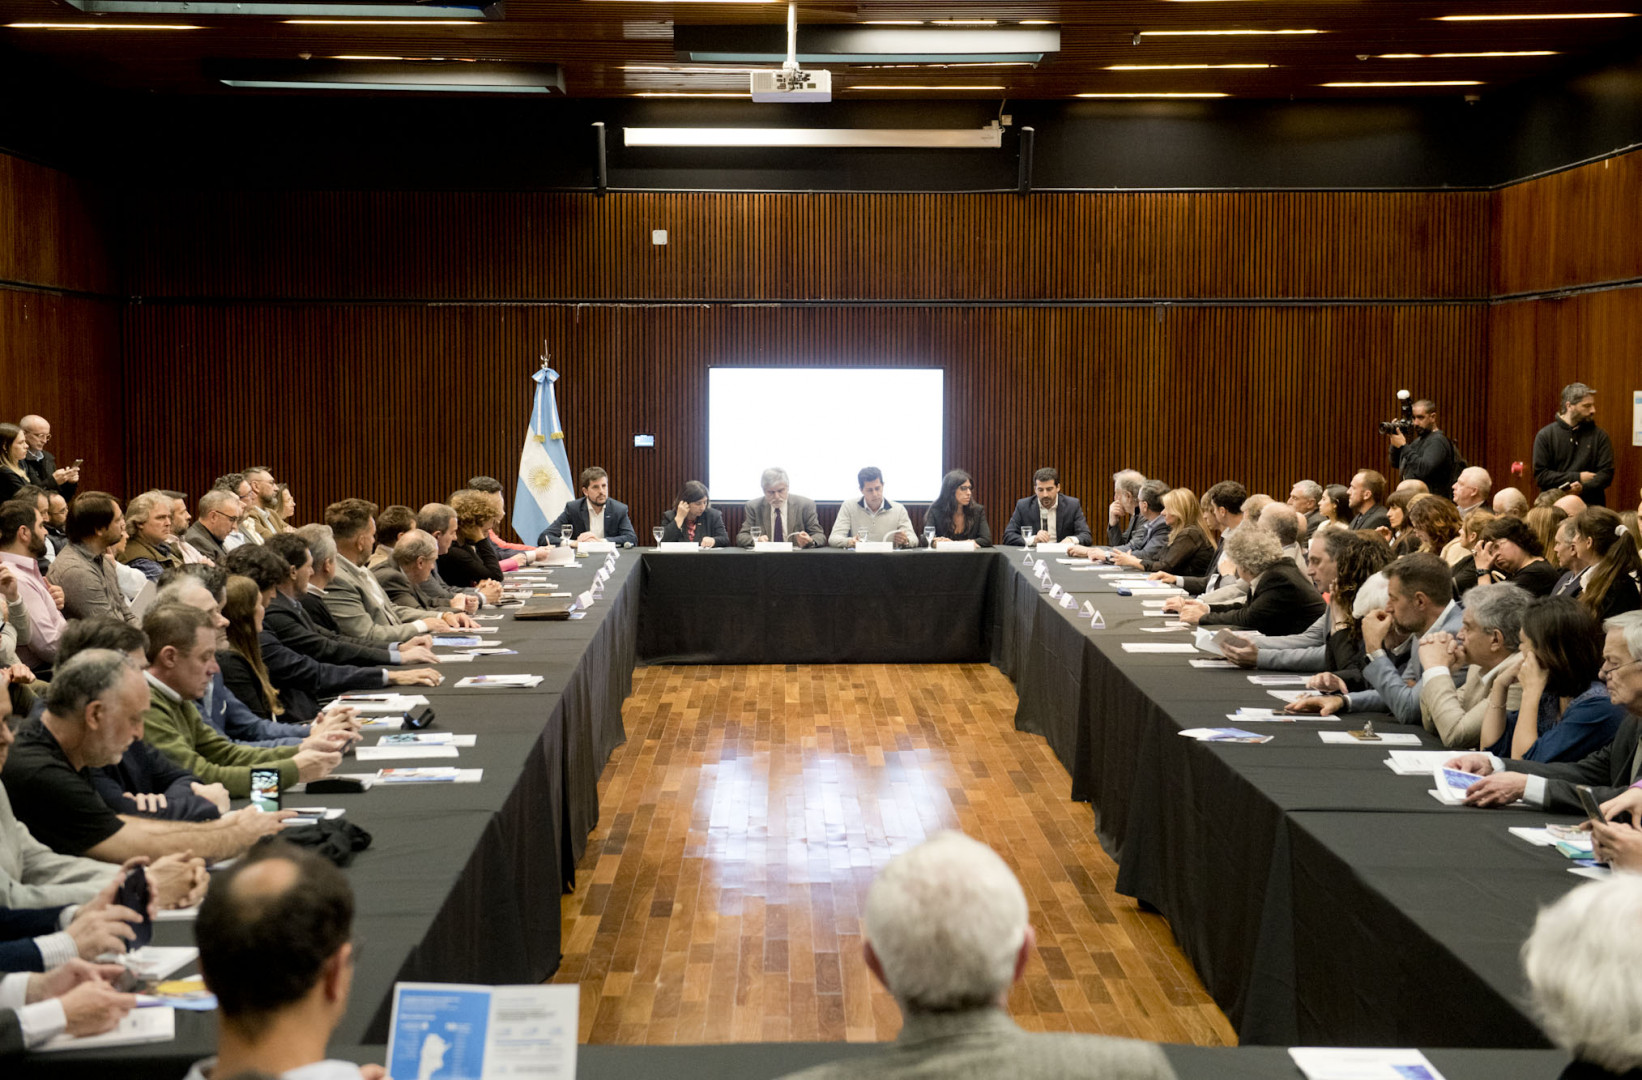 Vilmos and De Pedro chaired the “Innovation and Development in Argentina” meeting